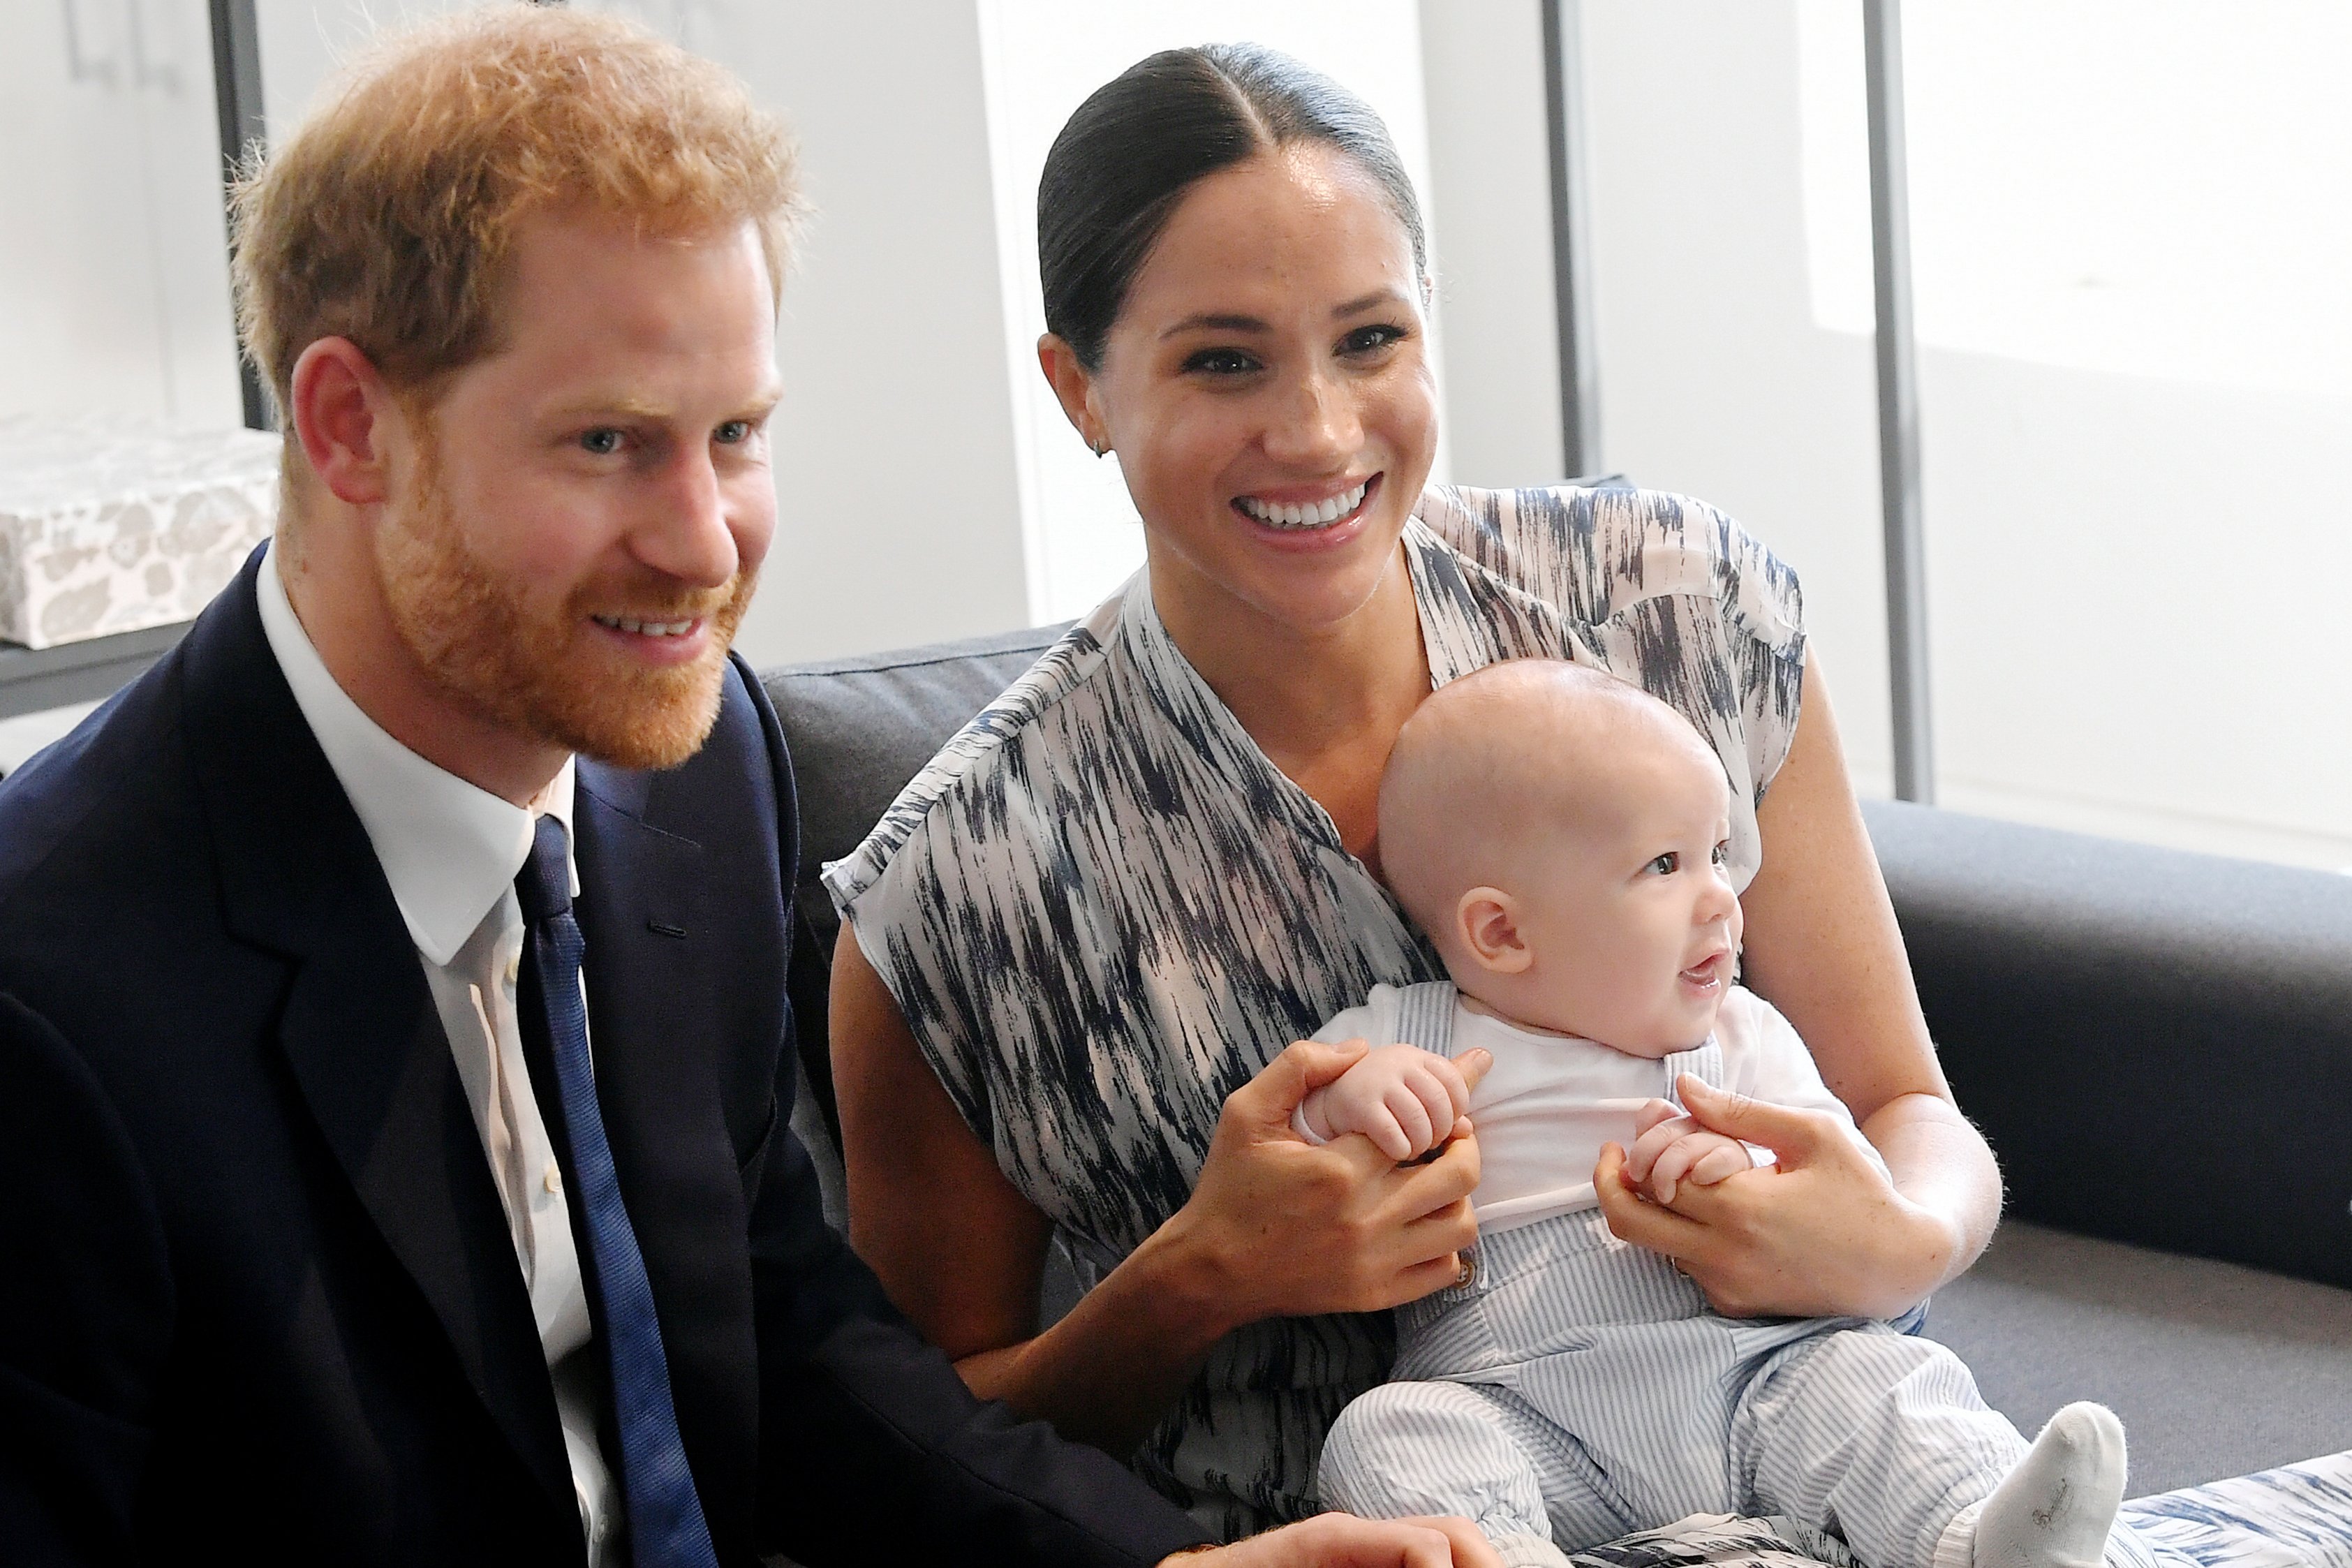 Prince Harry, Duke of Sussex, Meghan, Duchess of Sussex, and their baby son Archie Mountbatten-Windsor meet Archbishop Desmond Tutu and his daughter Thandeka Tutu-Gxashe at the Desmond & Leah Tutu Legacy Foundation during their royal tour of South Africa on September 25, 2019, in Cape Town, South Africa. | Source: Getty Images